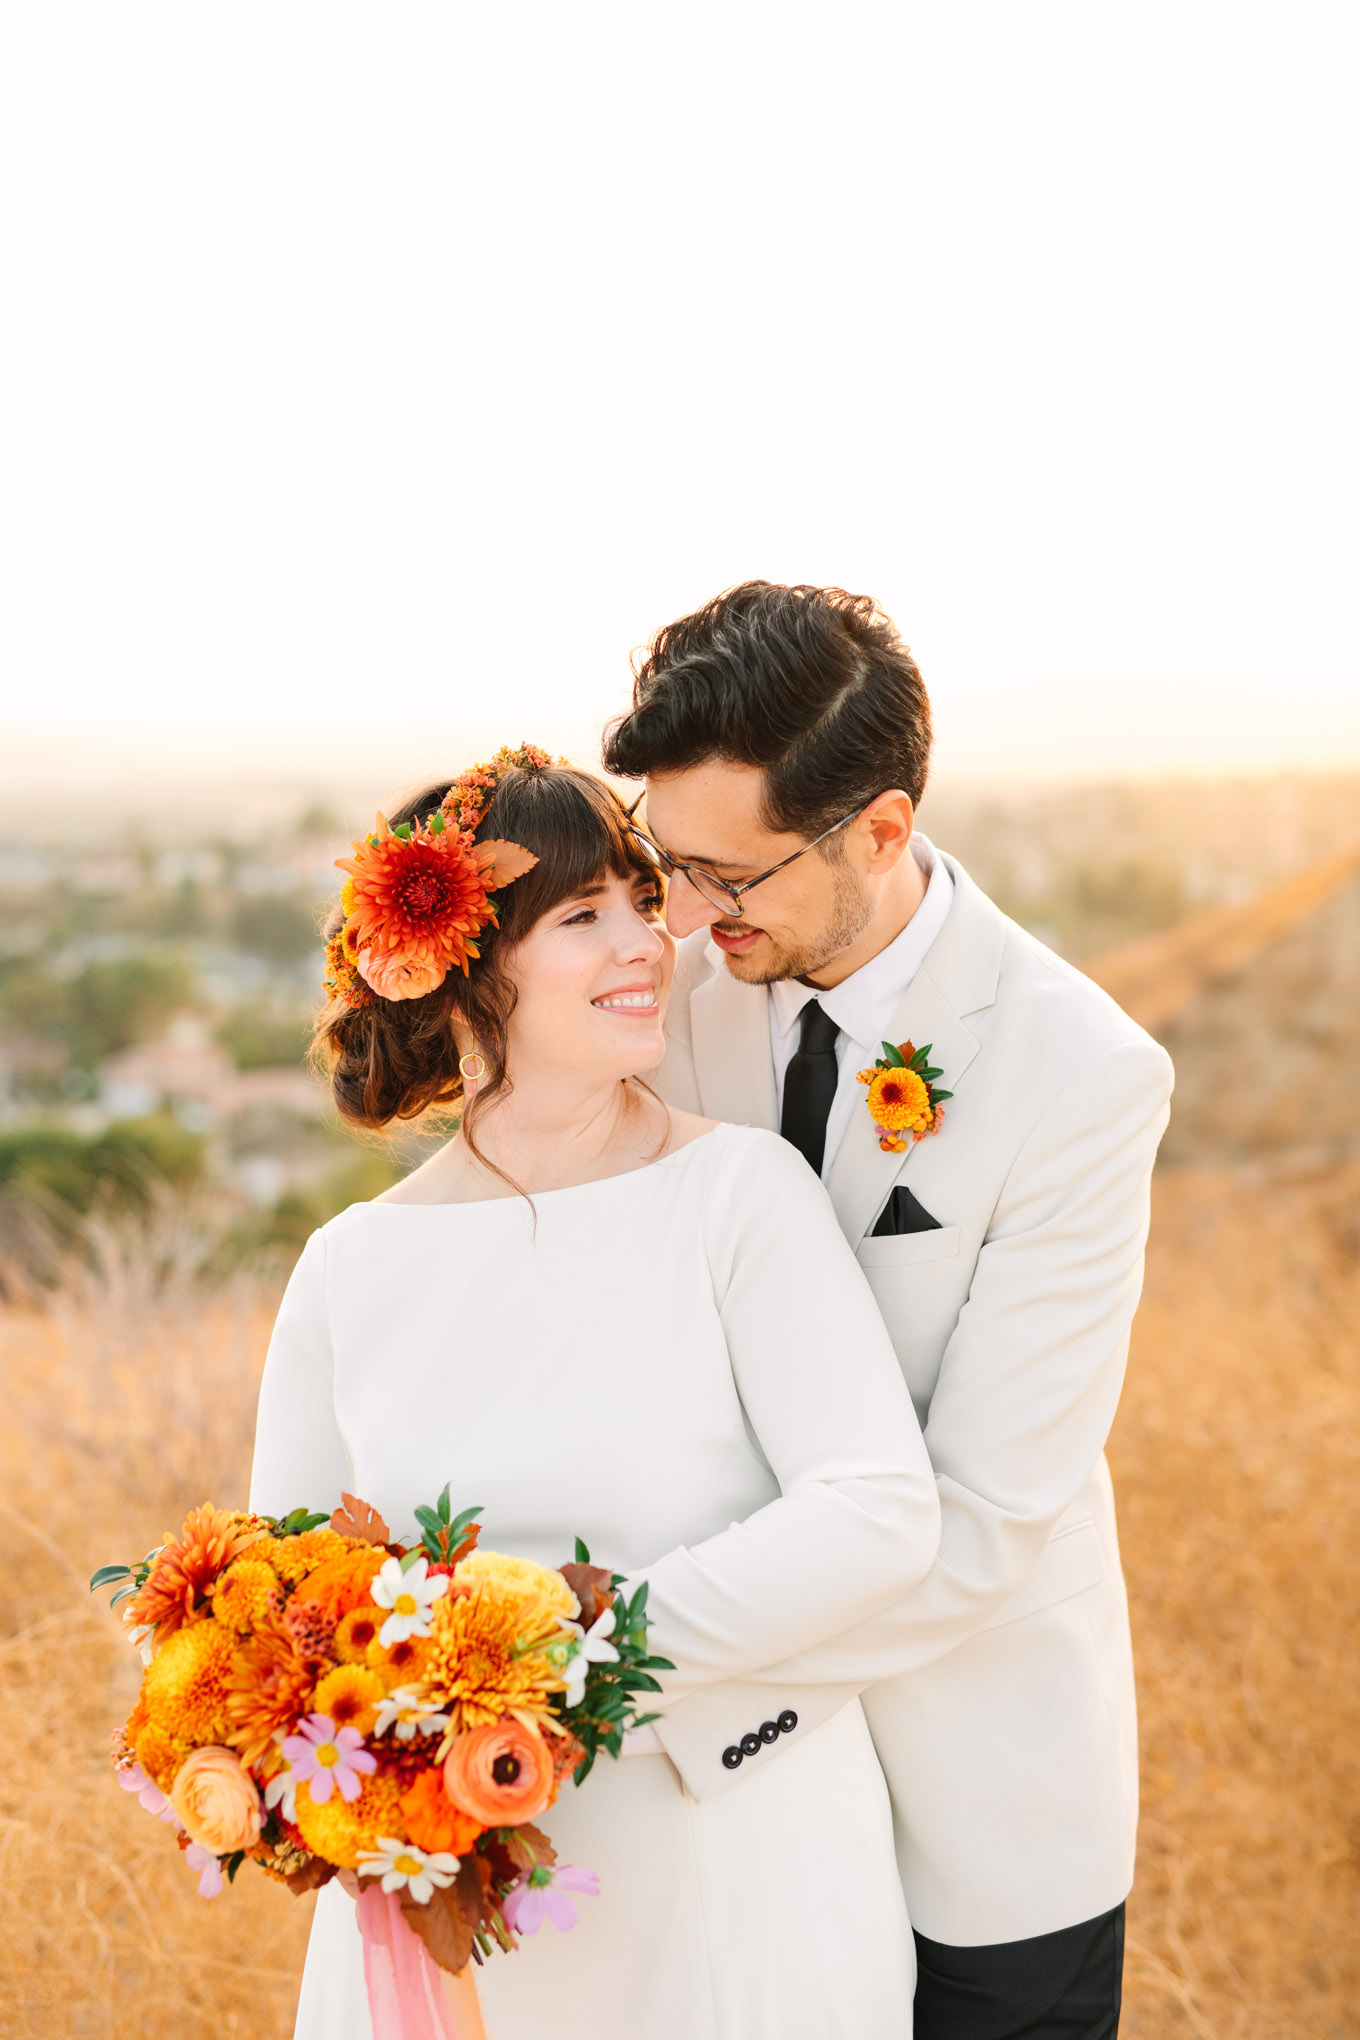 Bride and groom intimate portrait | Vibrant backyard micro wedding featured on Green Wedding Shoes | Colorful LA wedding photography | #losangeleswedding #backyardwedding #microwedding #laweddingphotographer Source: Mary Costa Photography | Los Angeles